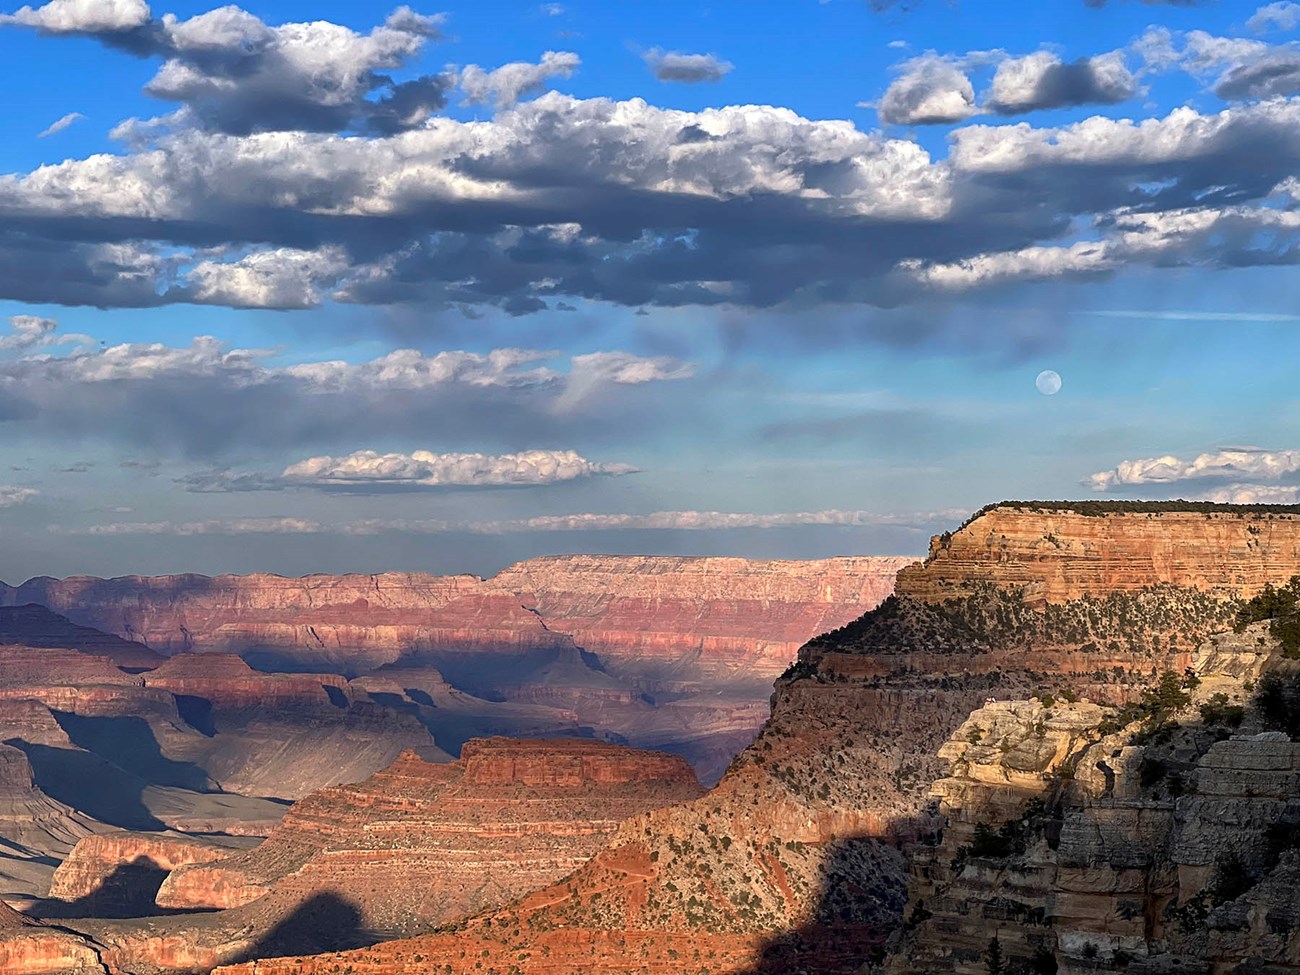 Approaching sunset, with lengthening shadows within a vast mile-deep canyon landscape. In a bright blue sky overhead, a full moon is rising between layers of cloud masses with dark undersides.